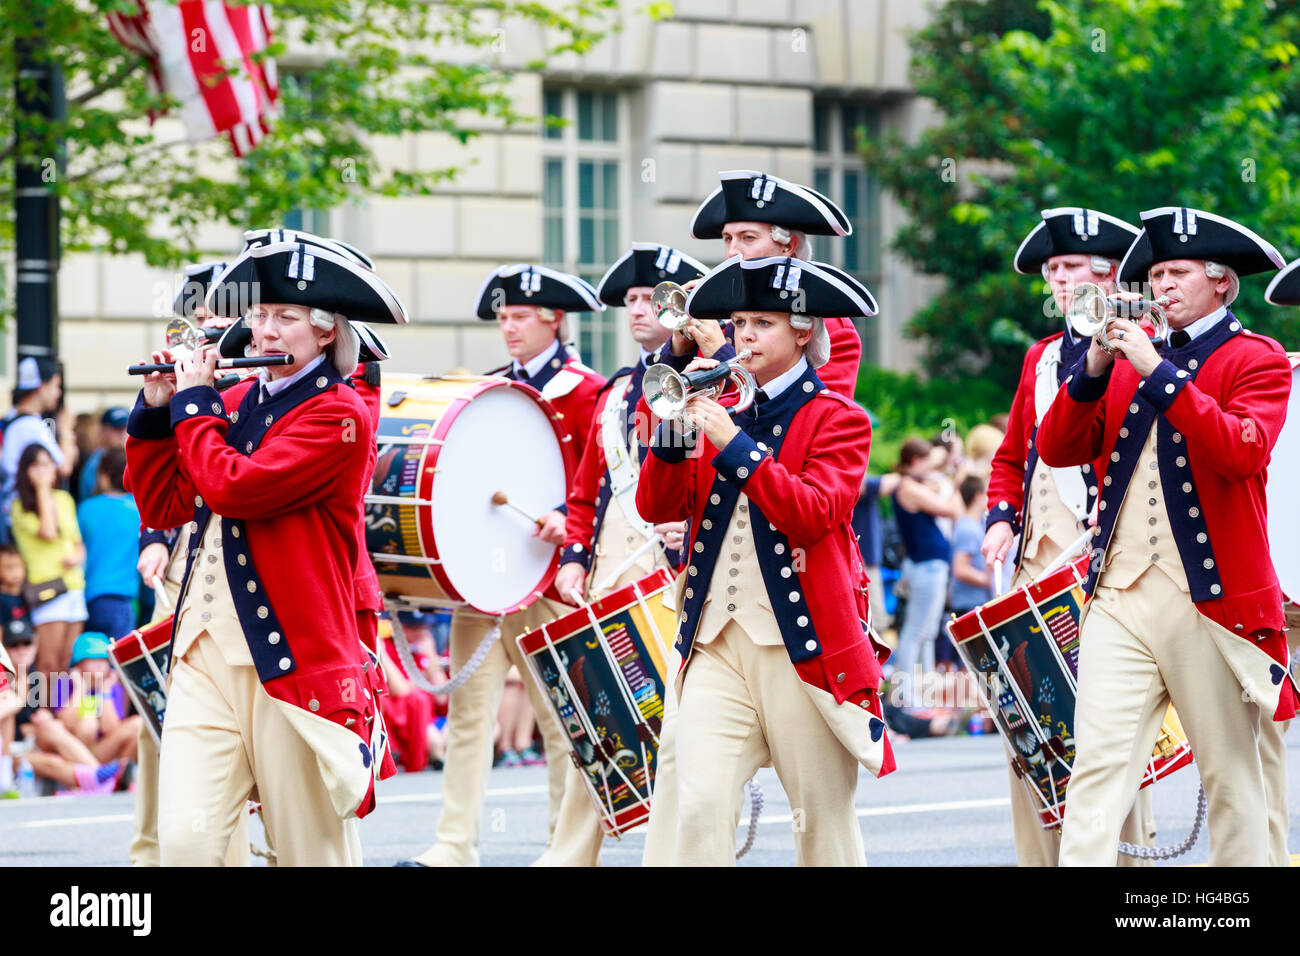 Washington, D.C., USA - July 4, 2015: The United States Army Old Guard Fife and Drum Corps in the annual National Independence Day Parade 2015. Stock Photo